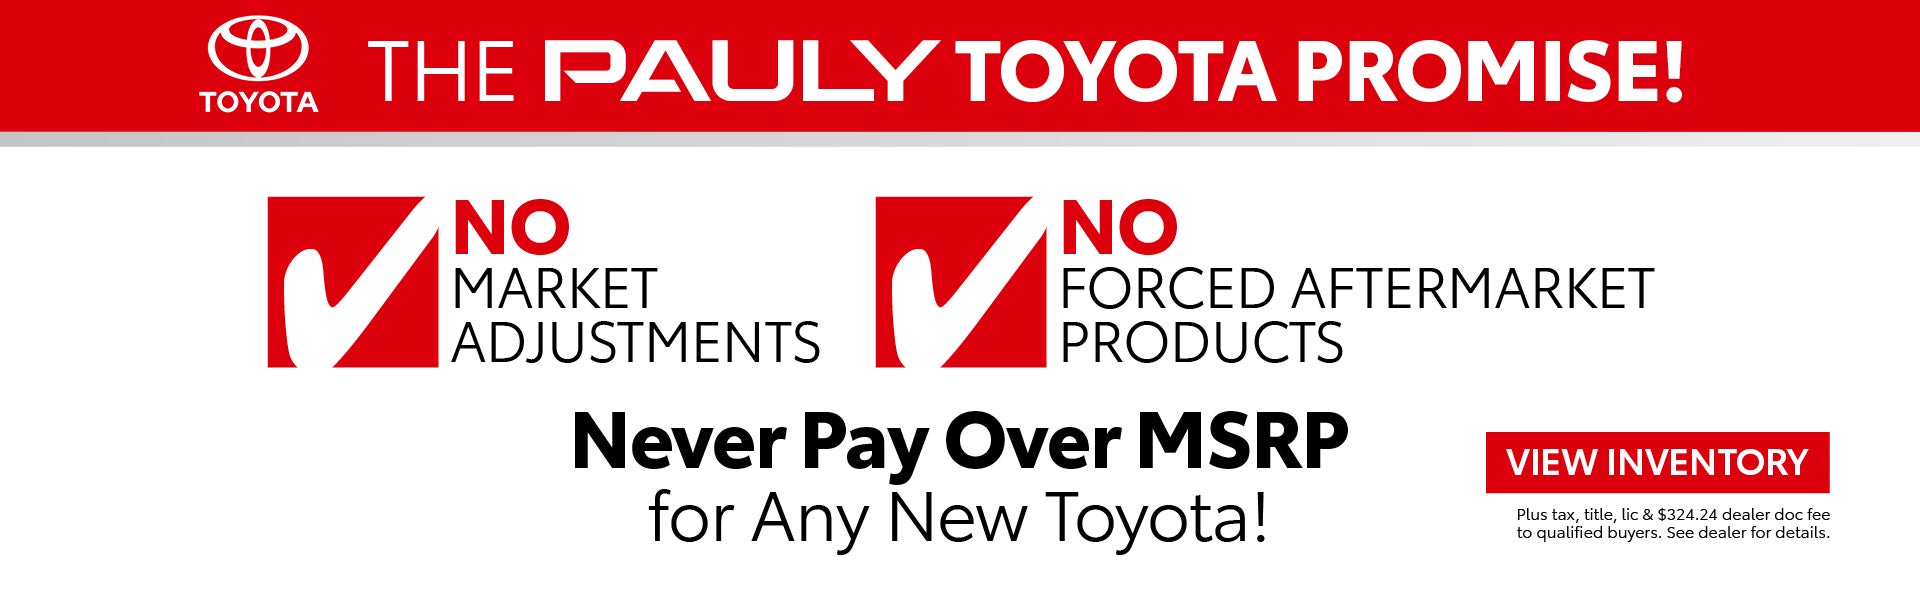 The Pauly Toyota Promise!